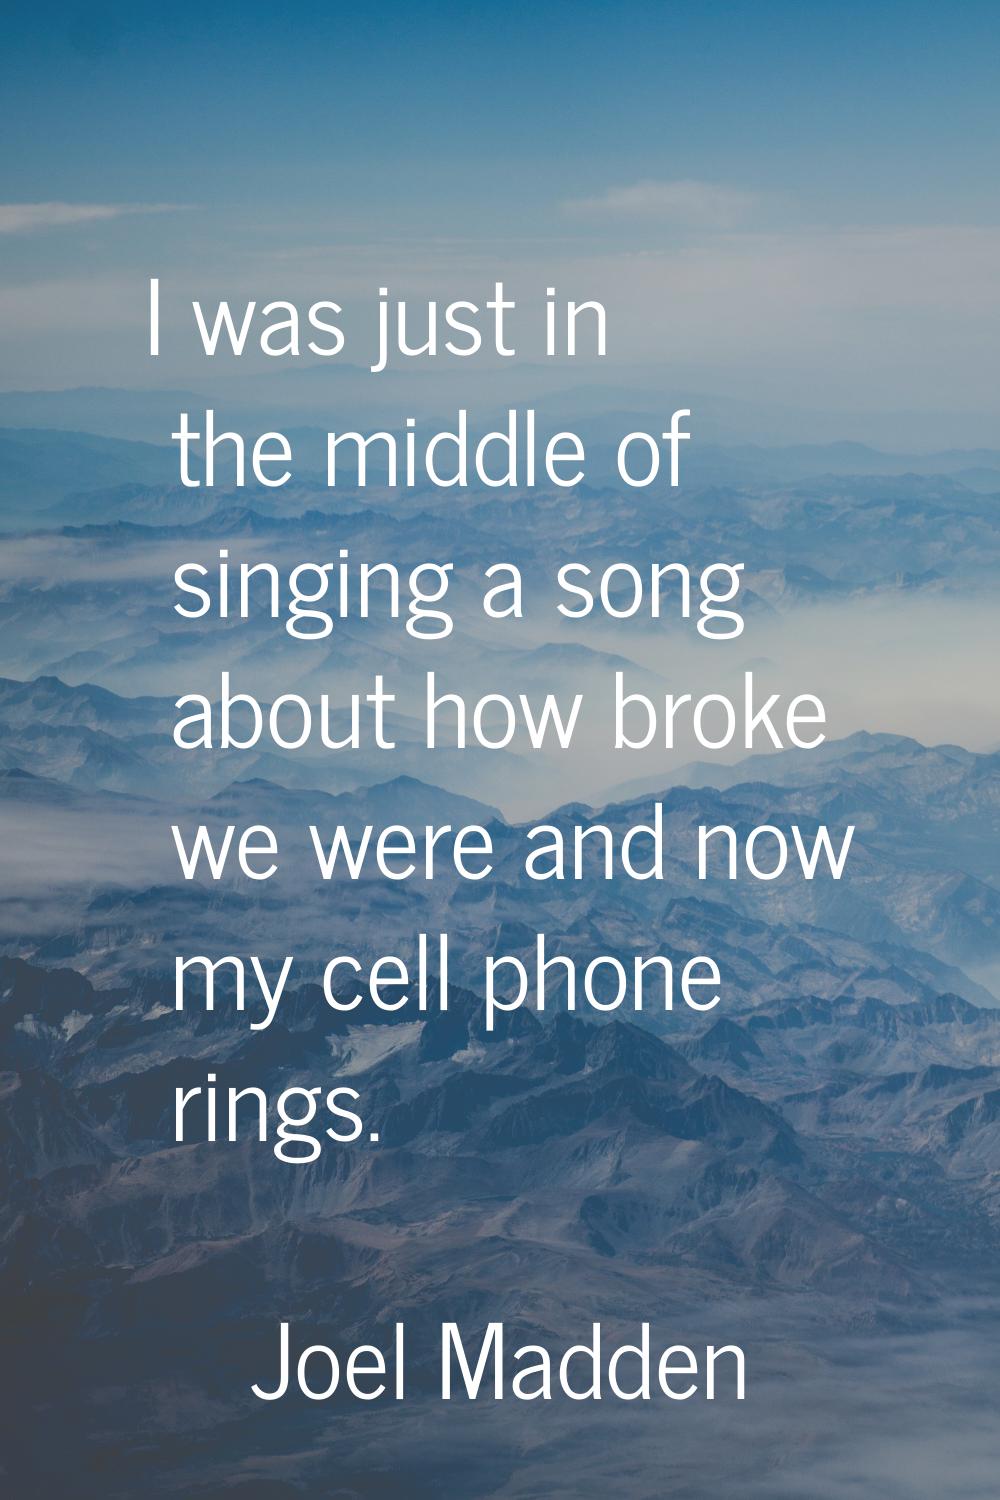 I was just in the middle of singing a song about how broke we were and now my cell phone rings.